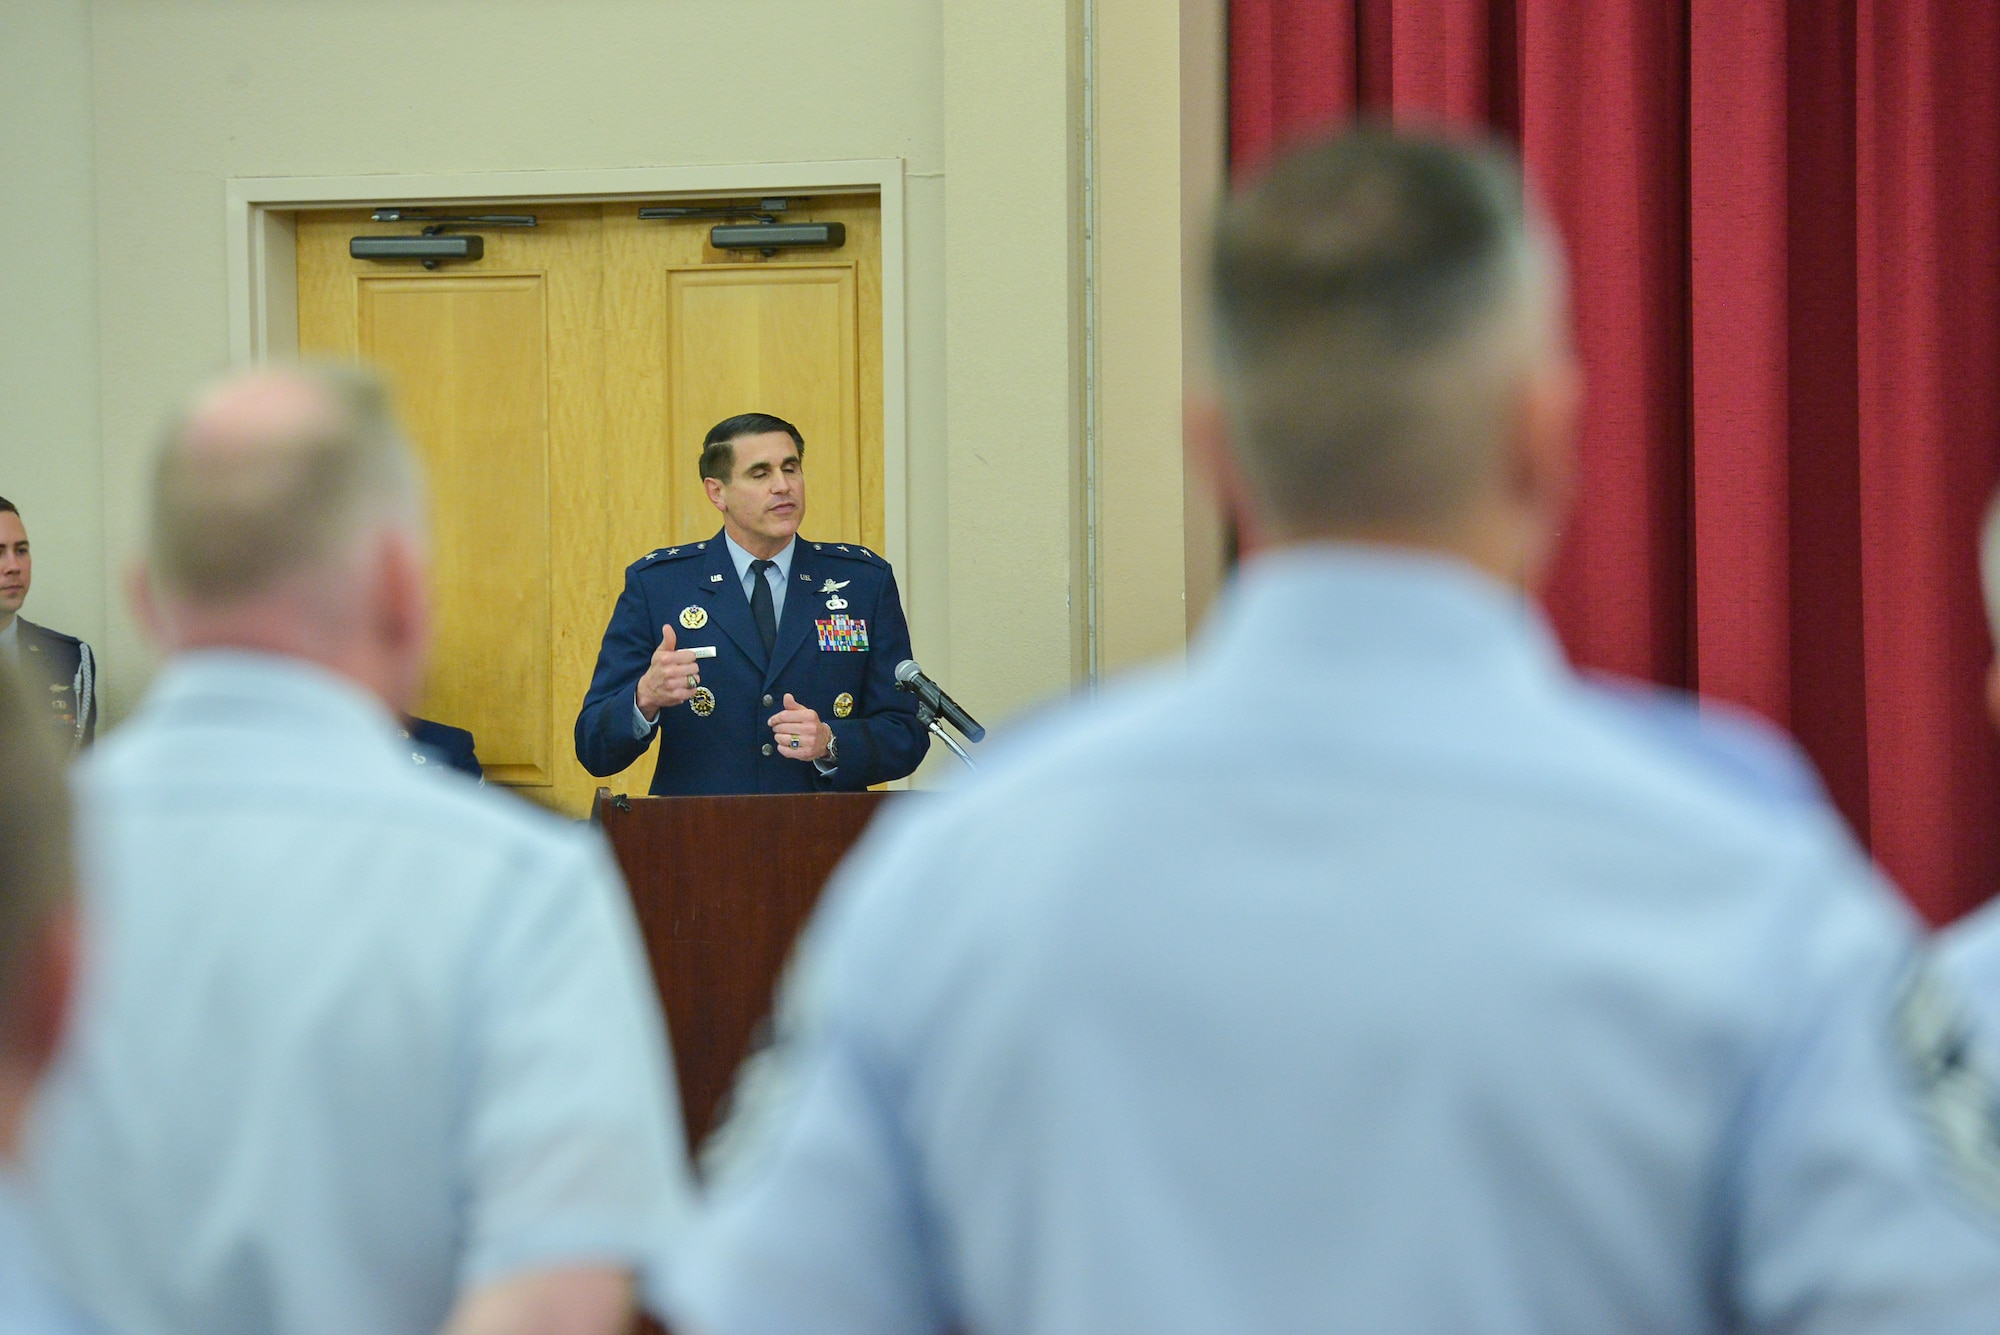 Maj. Gen. Bradford J. “BJ” Shwedo addresses the audience after taking command of 25th Air Force from Maj. Gen. John N.T. “Jack” Shanahan on Aug. 3, at Joint Base San Antonio-Lackland, Texas. (USAF photo by William B. Belcher)